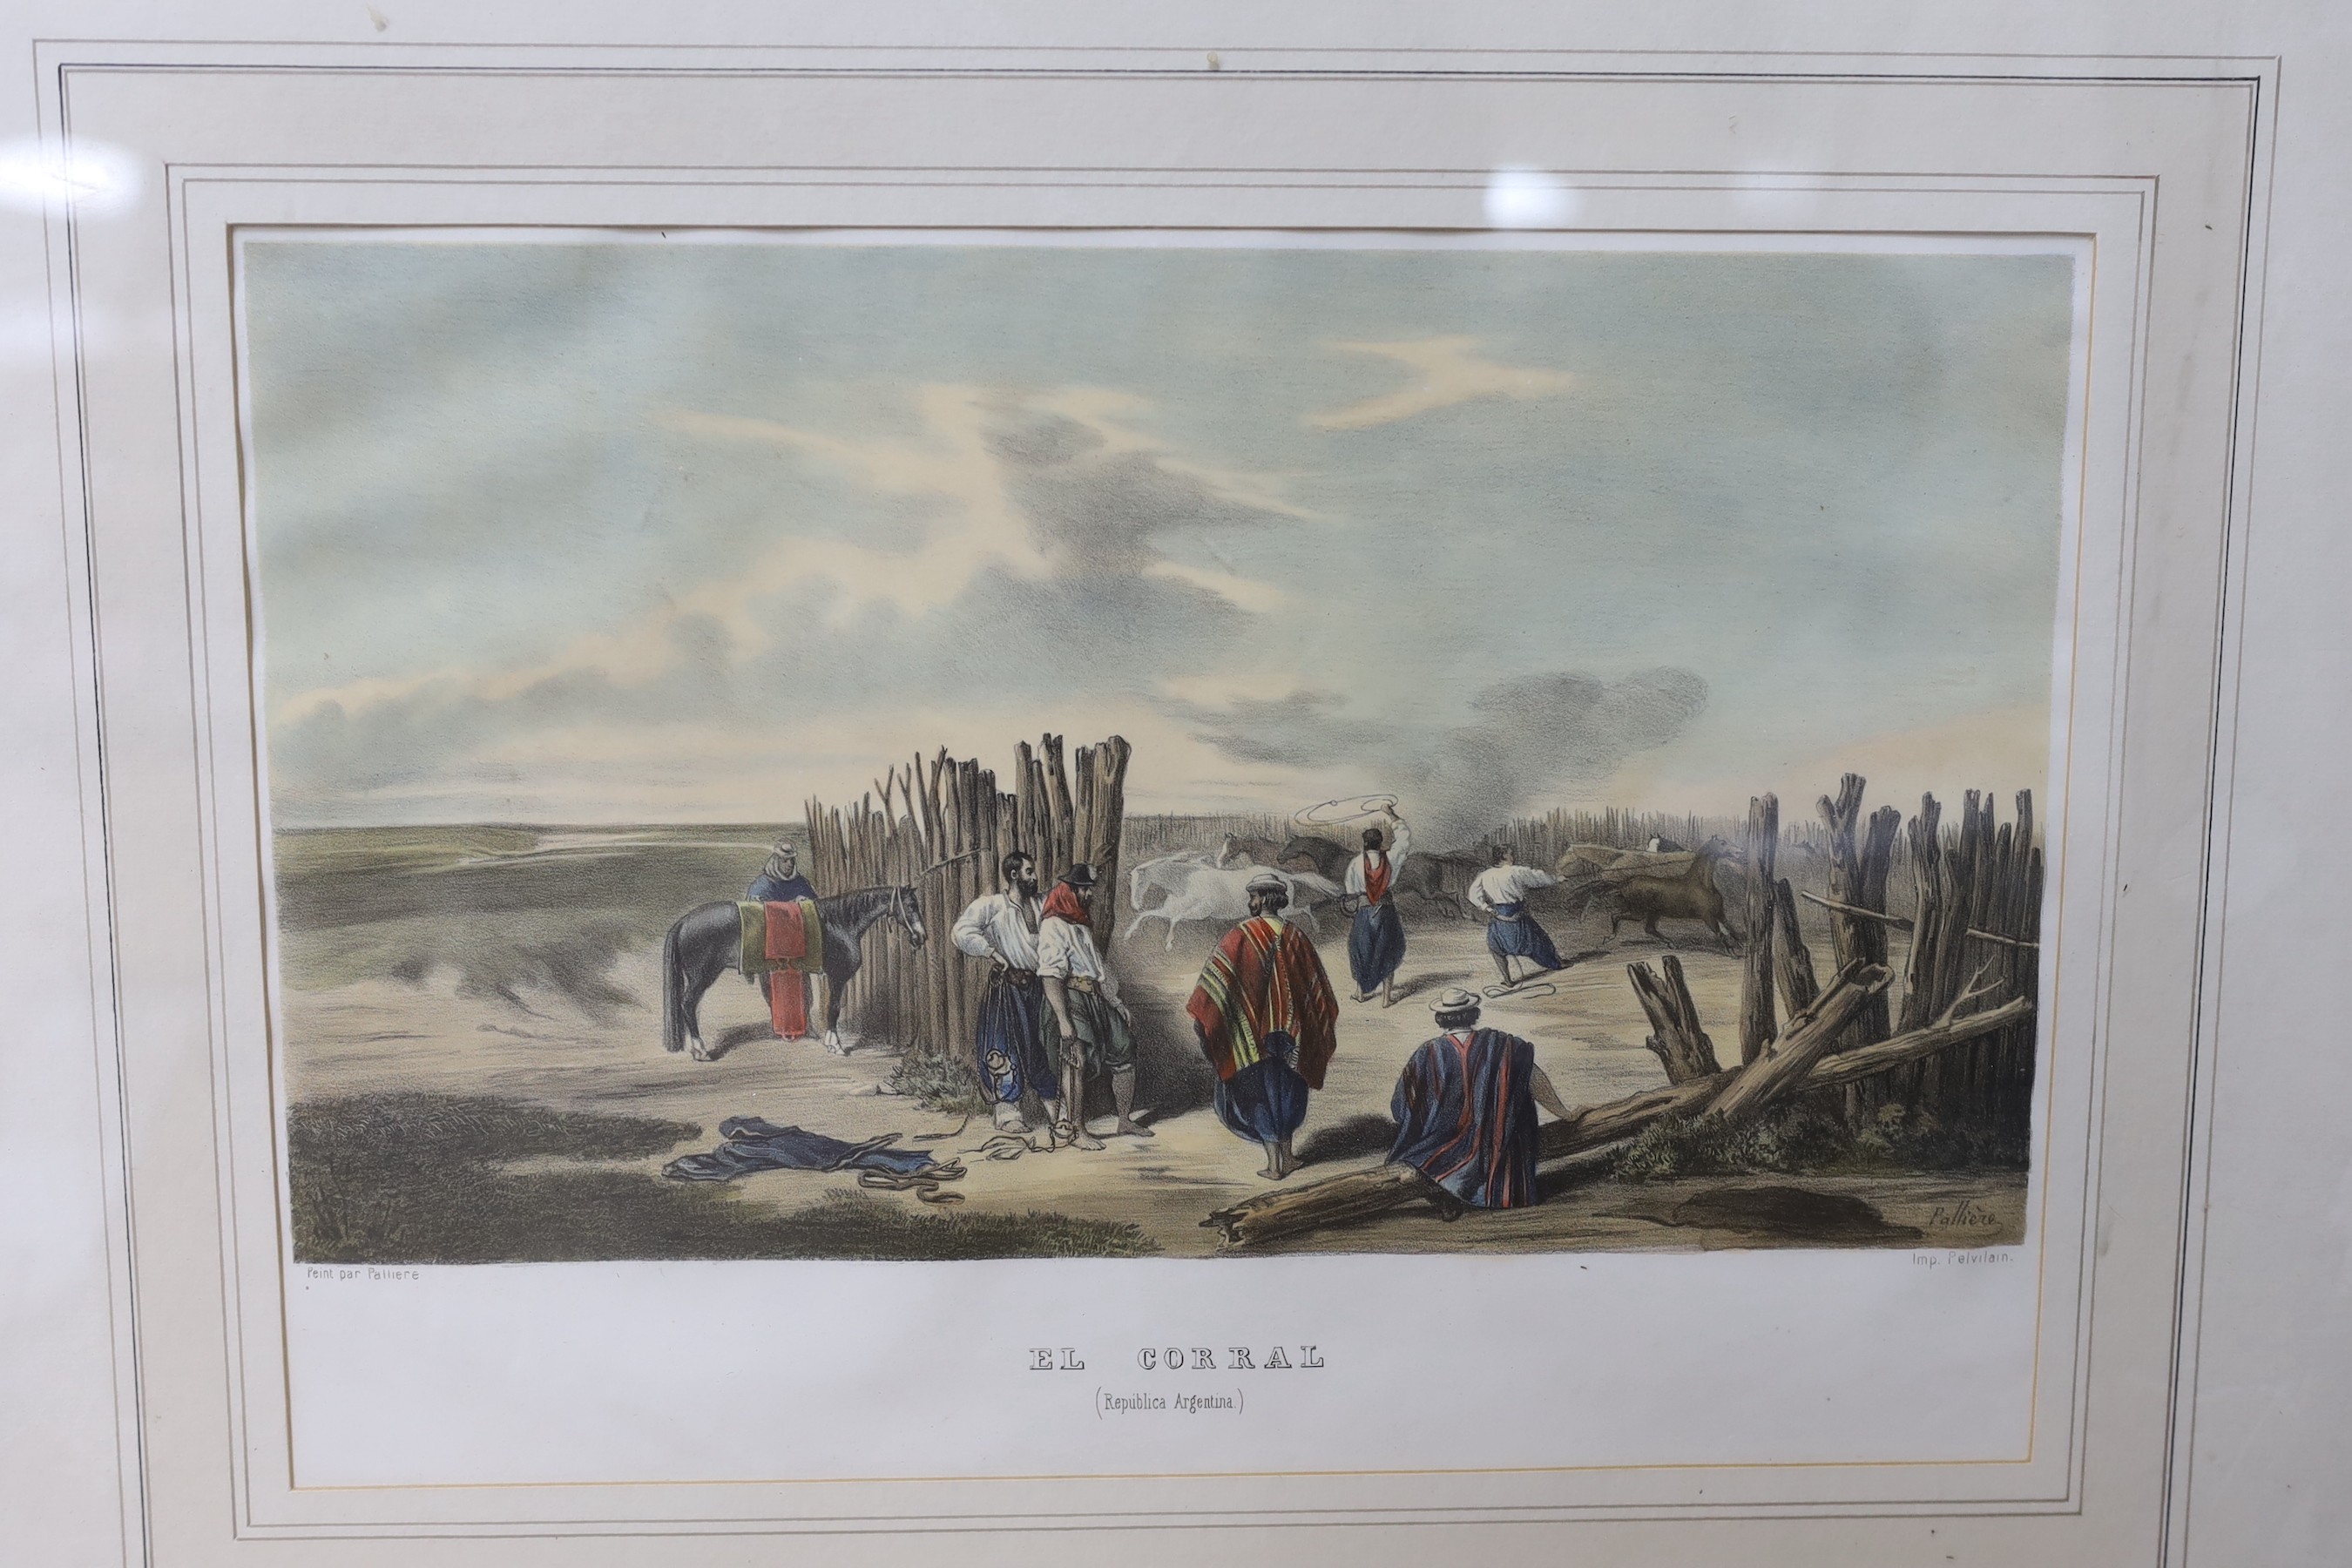 Pelvilain after Palliere, pair of coloured lithographs, 'El Asado' and 'El Corral' (Argentina) and two coloured engraved views of St Petersburg after Arnout, largest overall 29 x 34cm